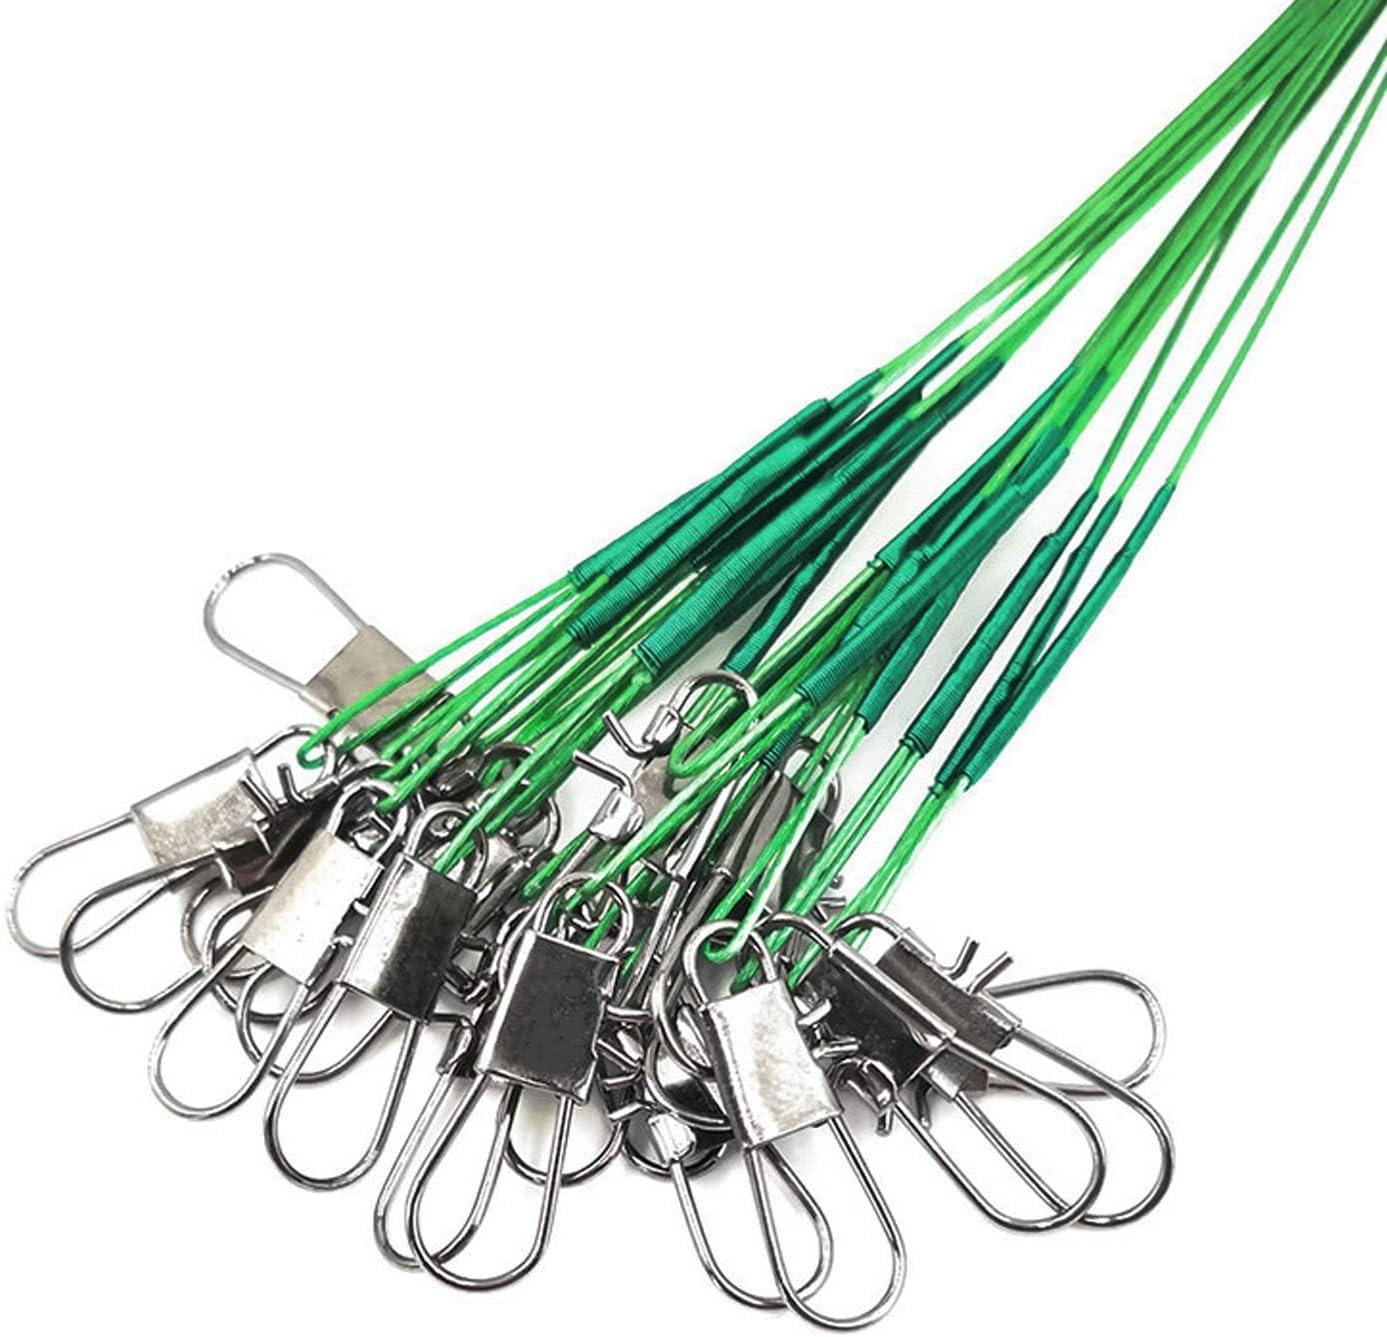 MOBOREST 60PCS Fishing Leaders, Hi-Low Rig Fish Line Stainless